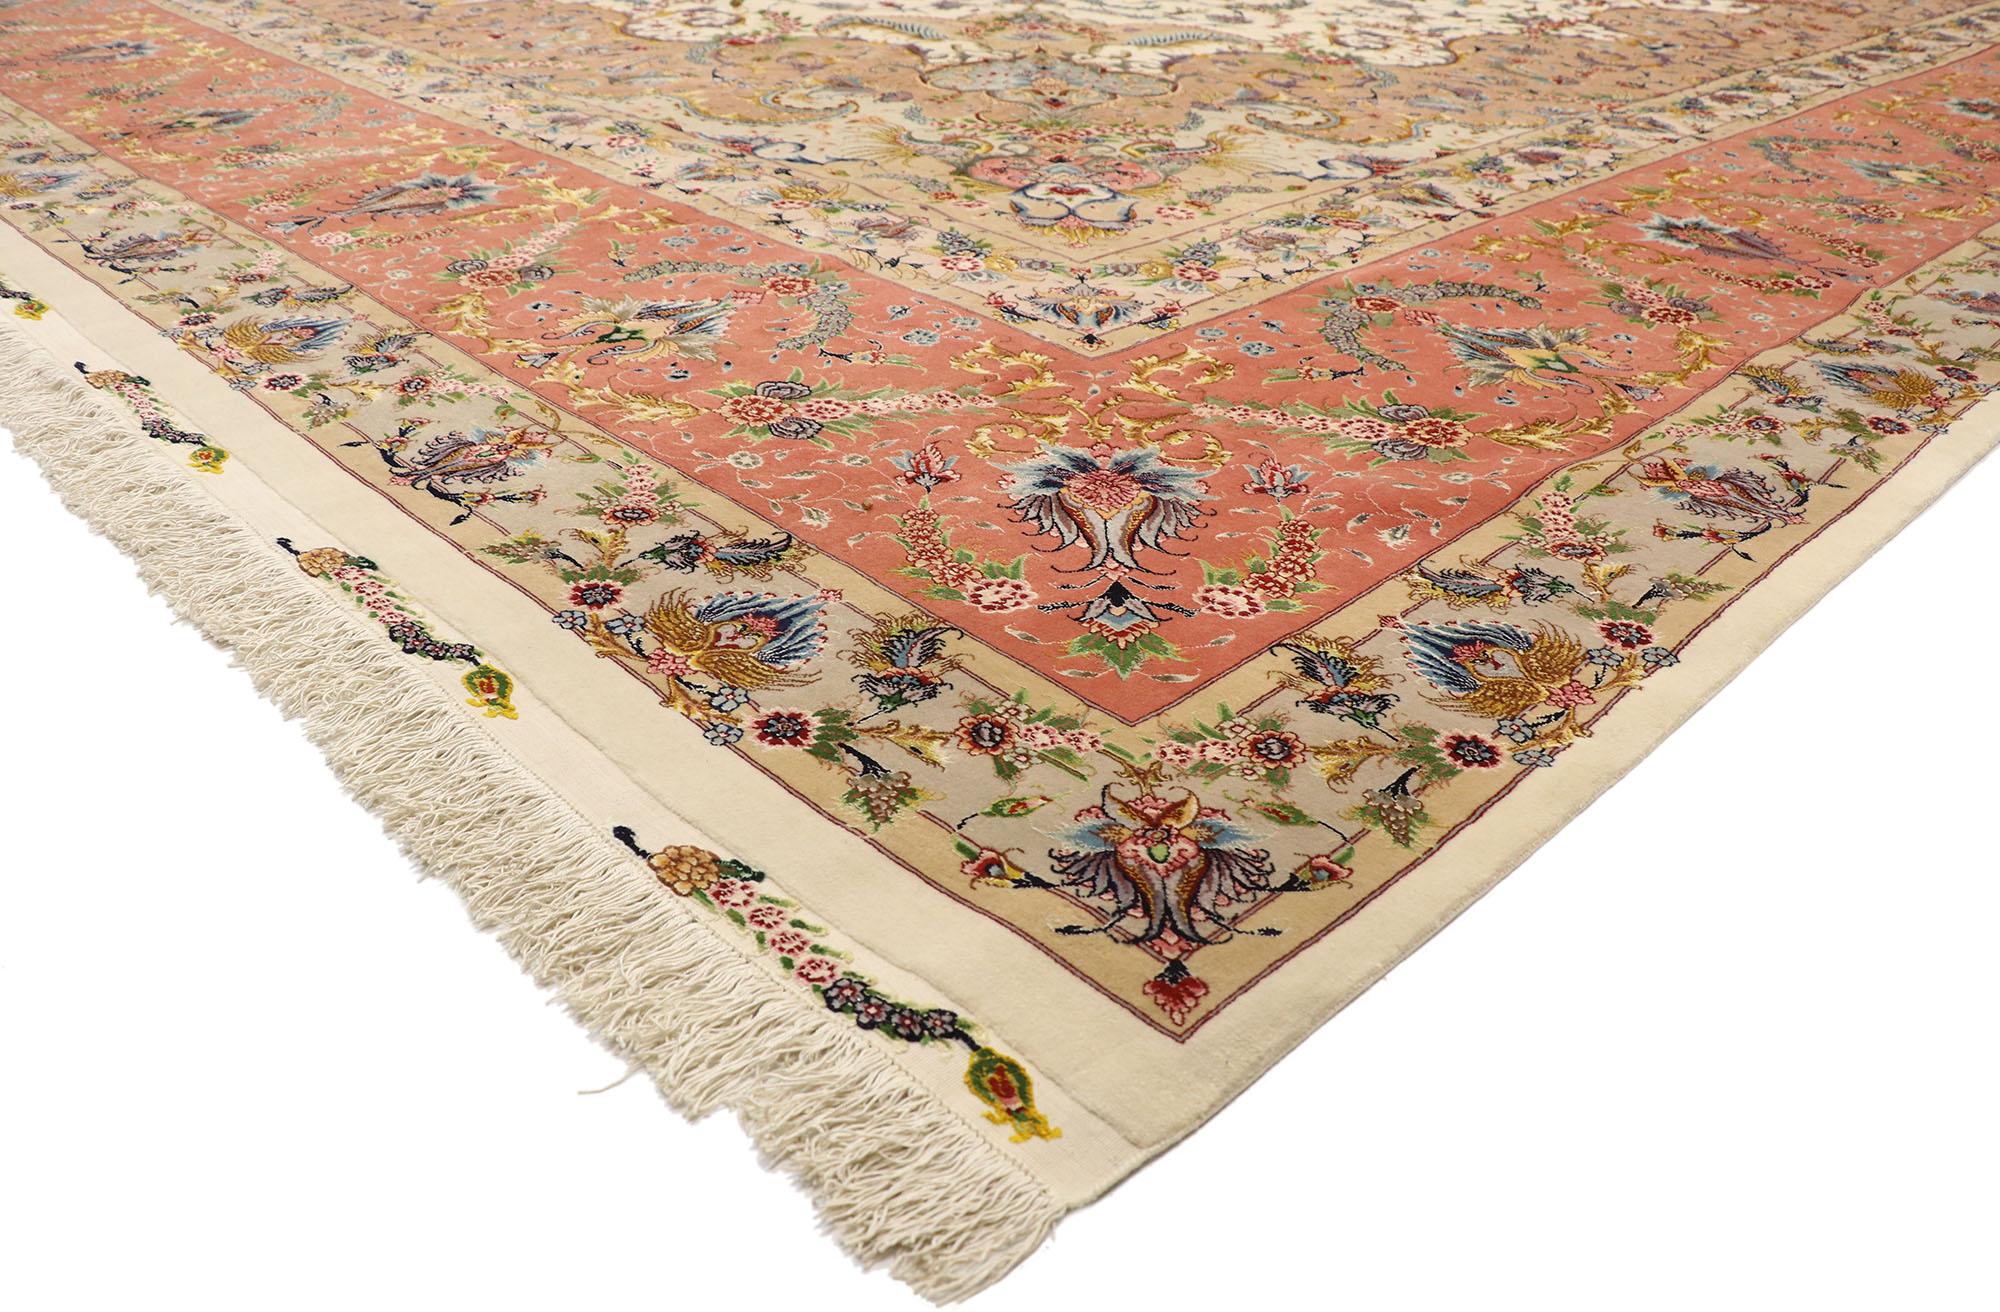 77437 Vintage Persian Tabriz Shirfar Rug, 15'10 x 26'07. Bedizened with intricate embellishments and balanced symmetry, this vintage Persian Tabriz Shirfar rug, crafted from hand-knotted wool and silk, radiates the essence of French Provincial and